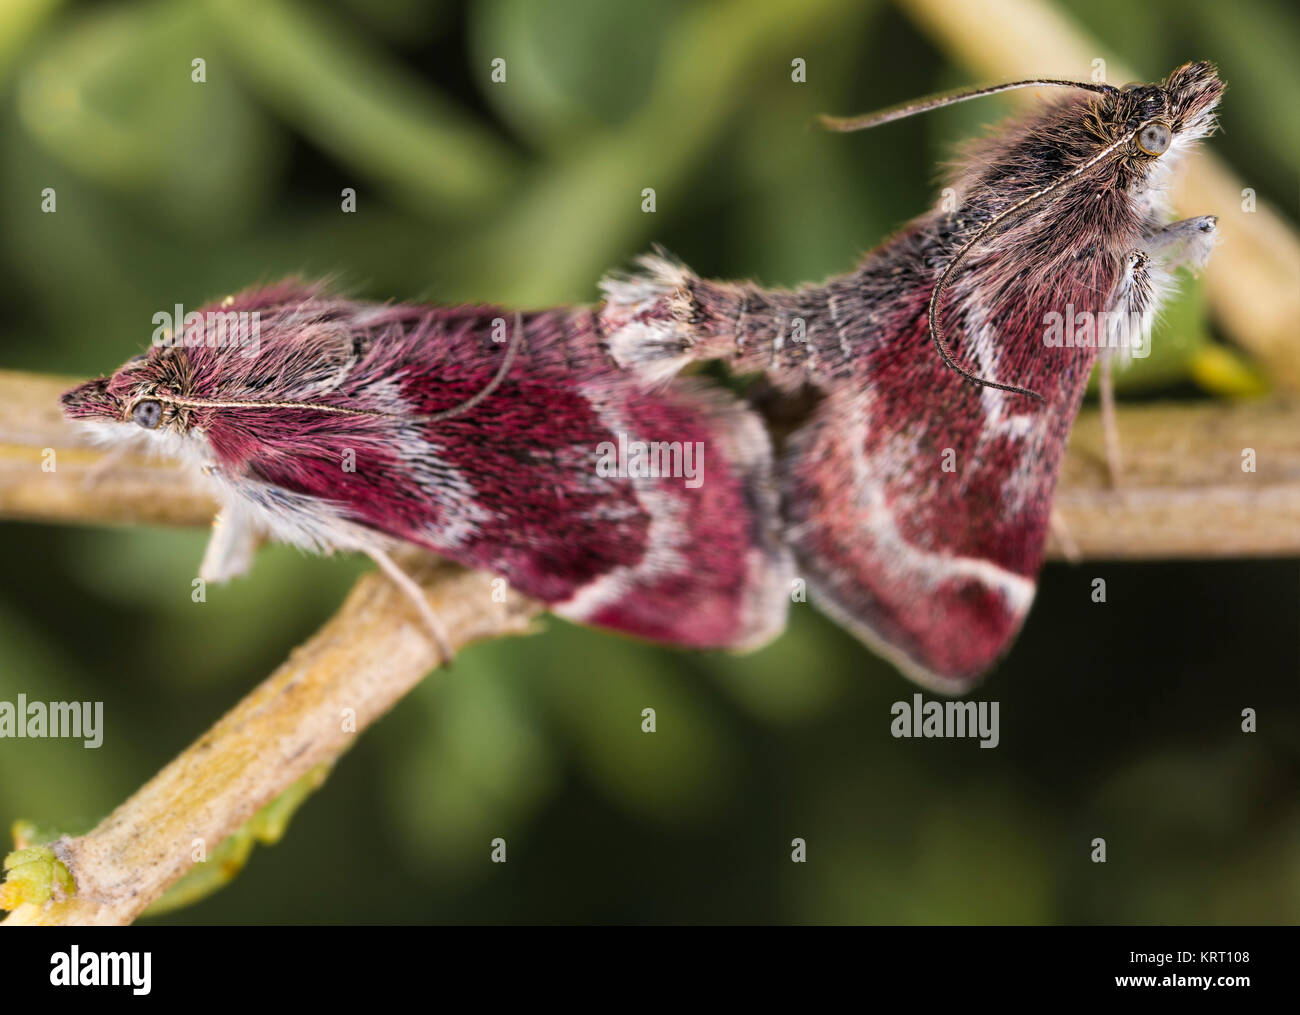 Insects photographed in their natural environment. Stock Photo